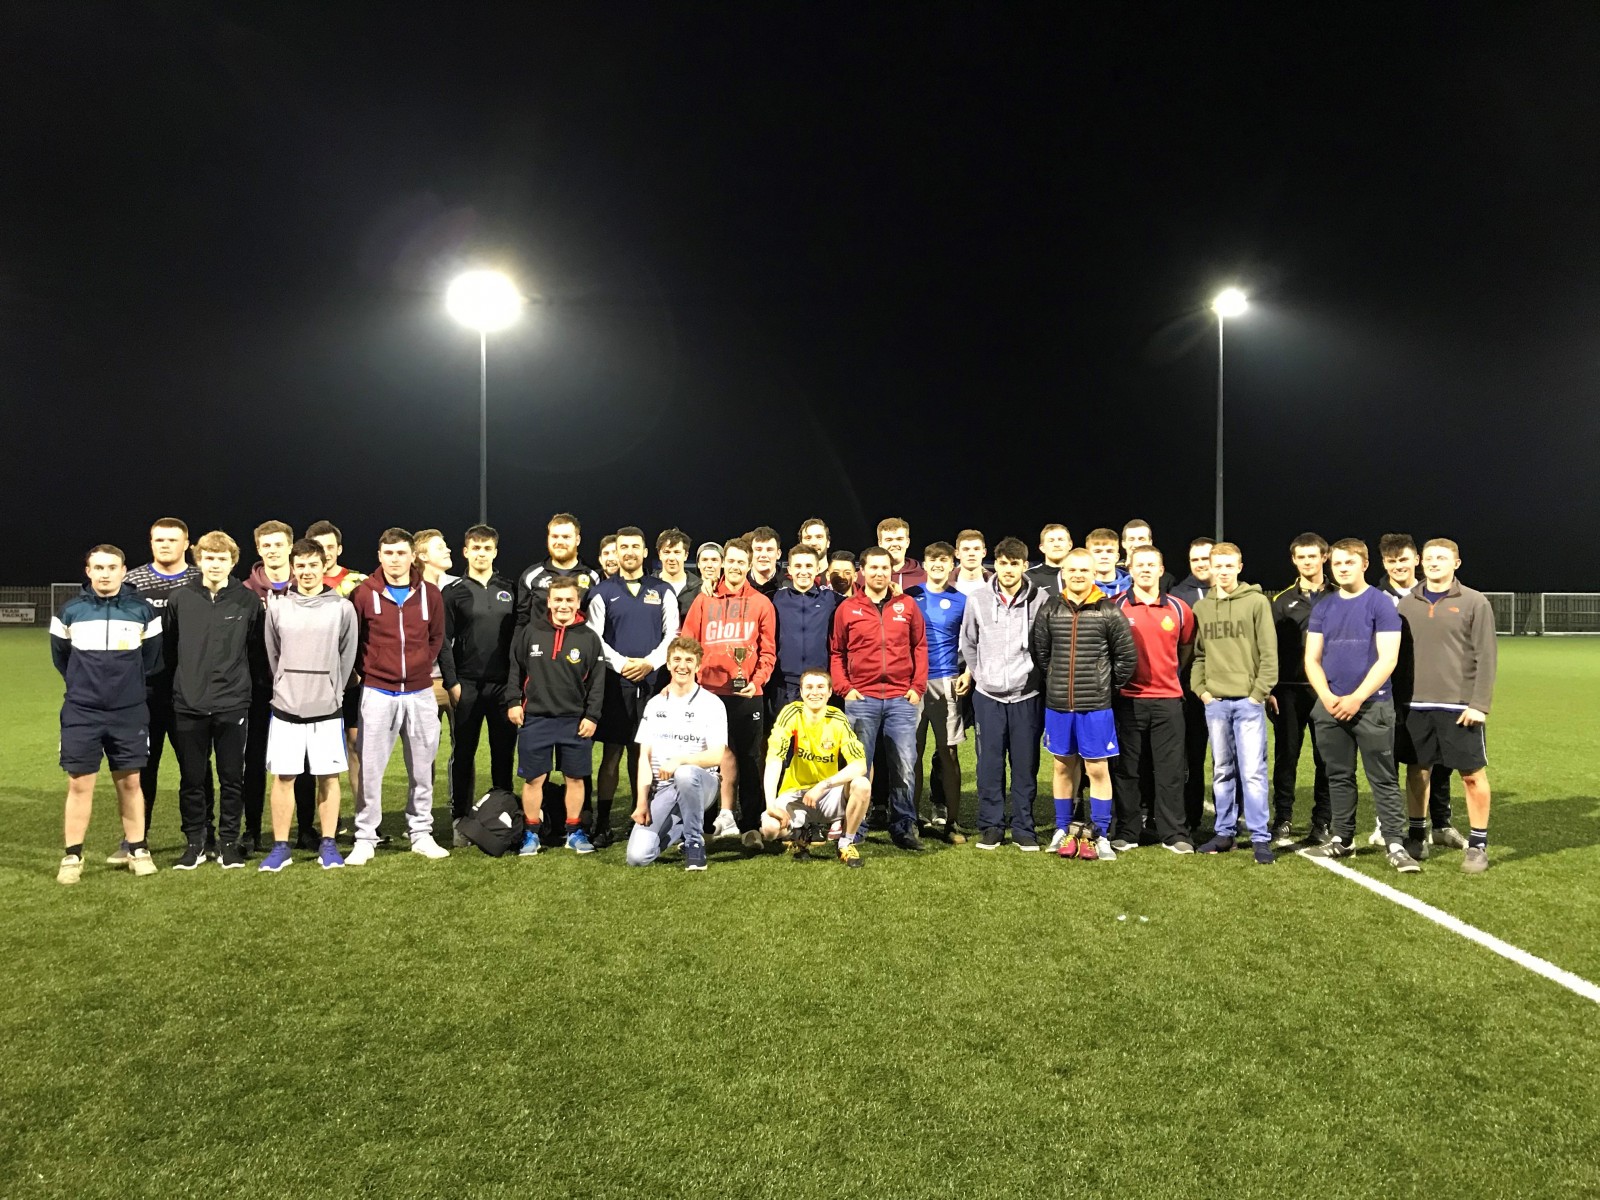 OVER £700 RAISED AT YOUNG FARMERS SCOTT CARSON MEMORIAL CUP FOOTBALL ...